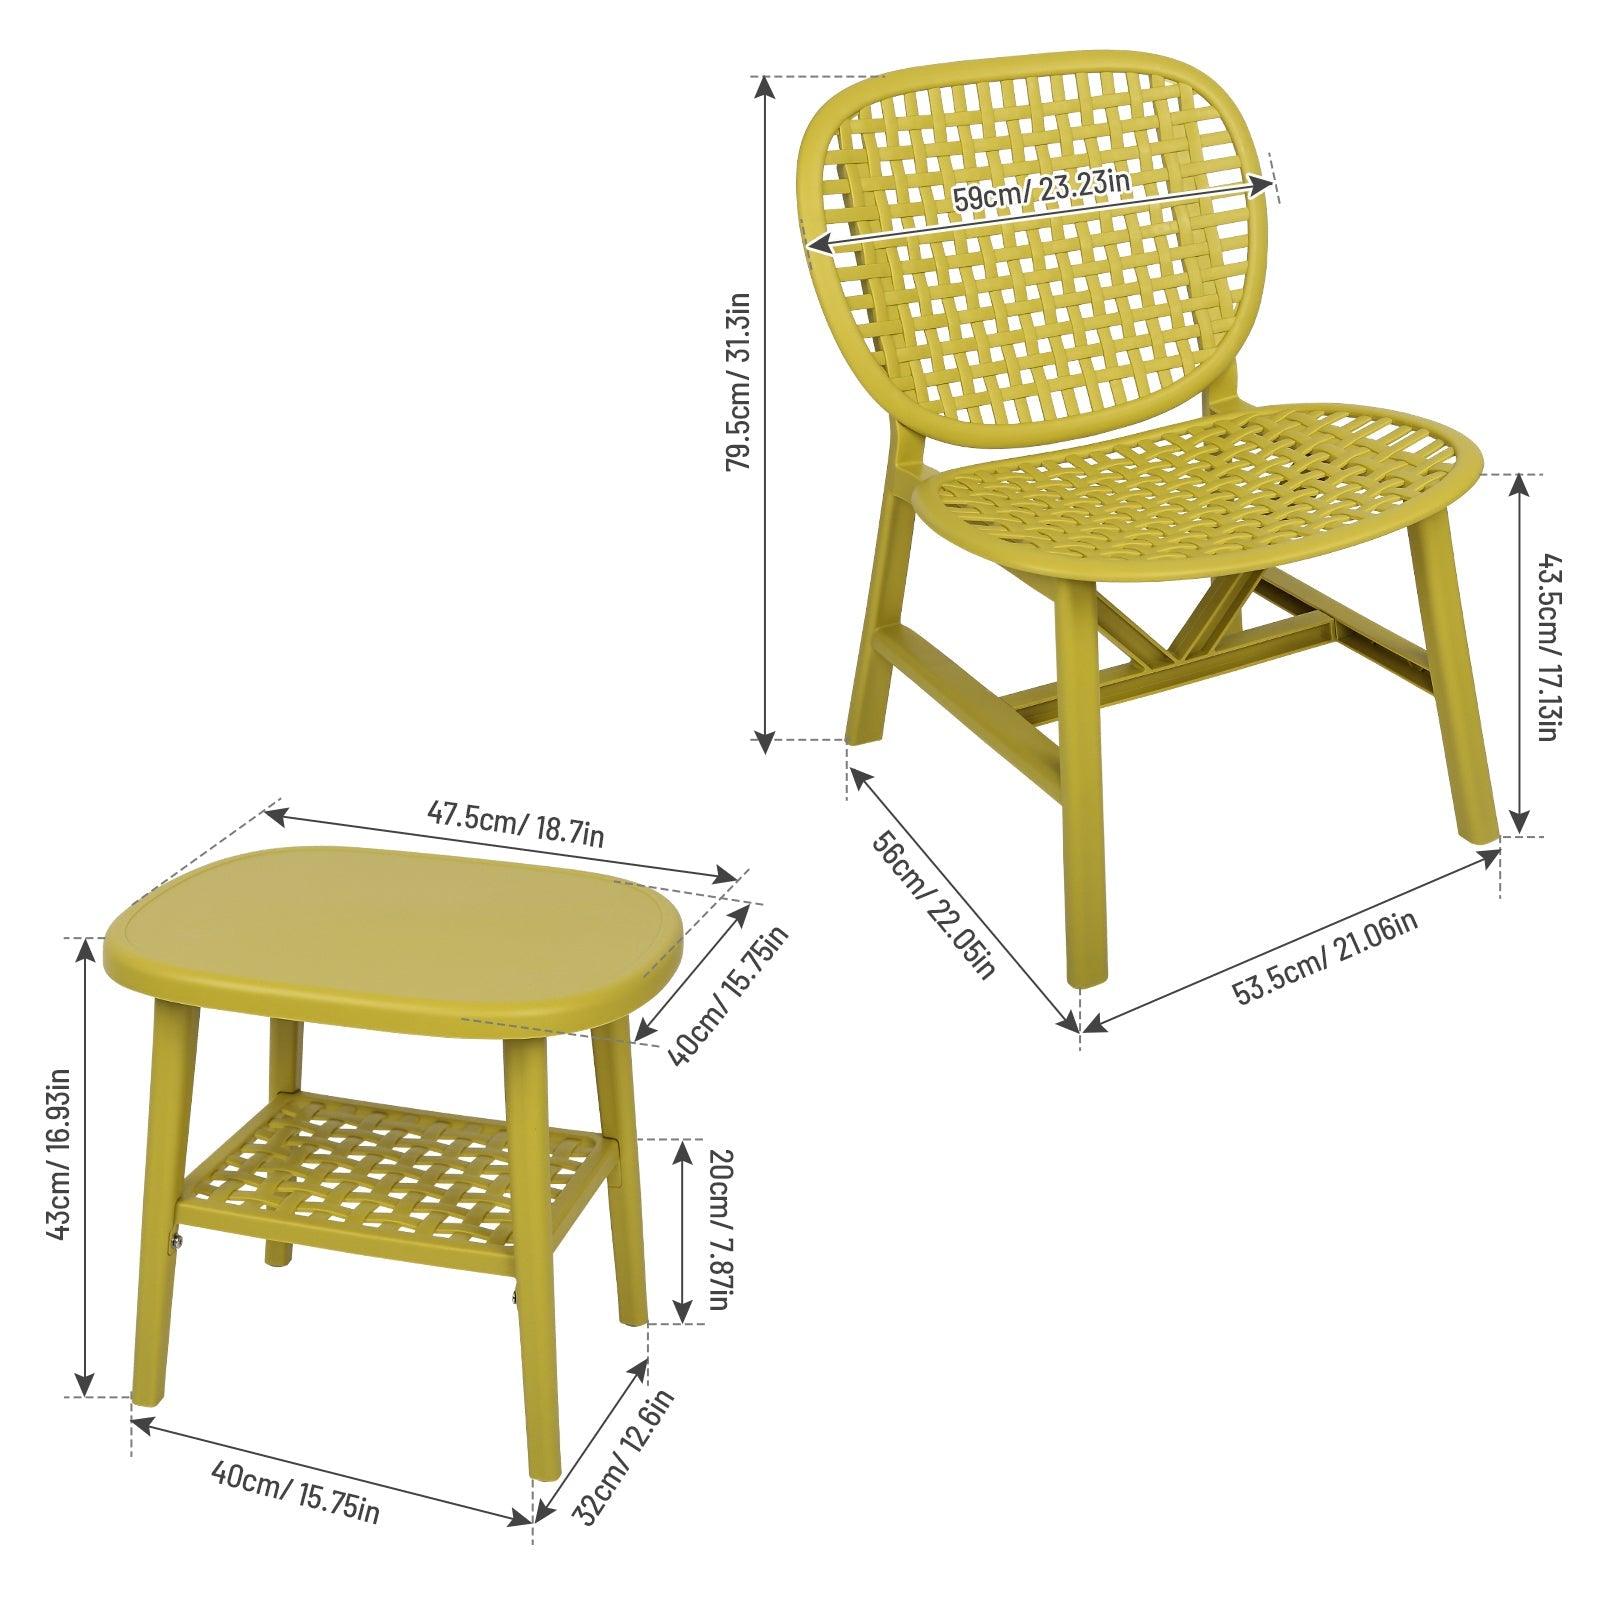 3 Pieces Hollow Design Patio Table Chair Set All Weather Conversation Bistro Set Outdoor Coffee Table With Open Shelf And Lounge Chairs With Widened Seat For Balcony Garden Yard Yellow LamCham